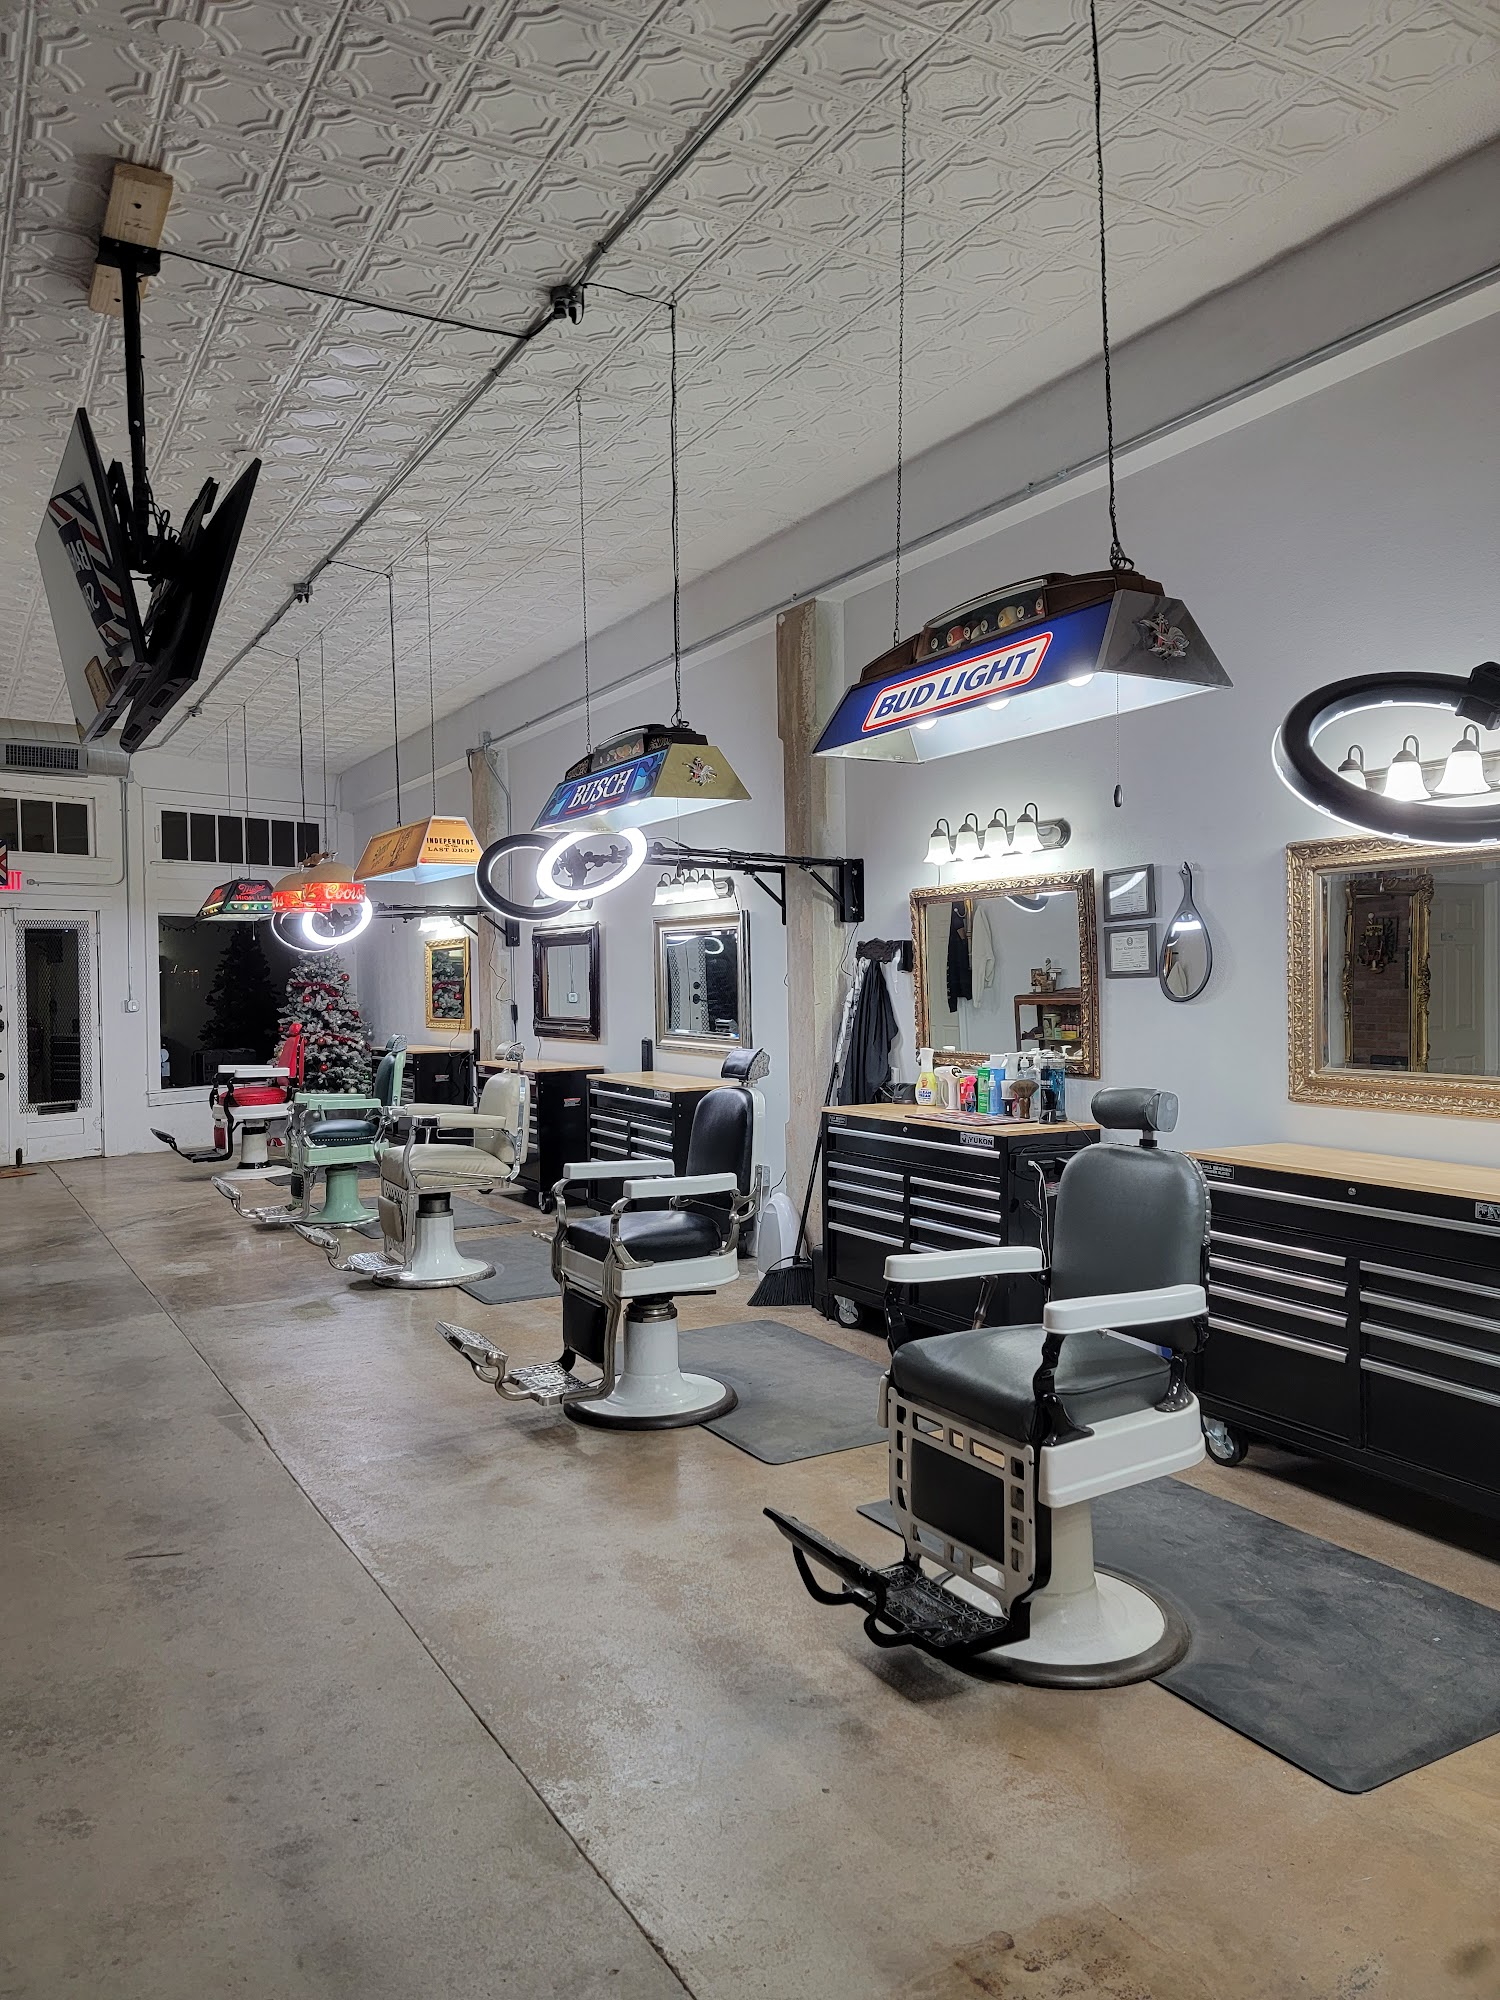 All Outs Barber Shop